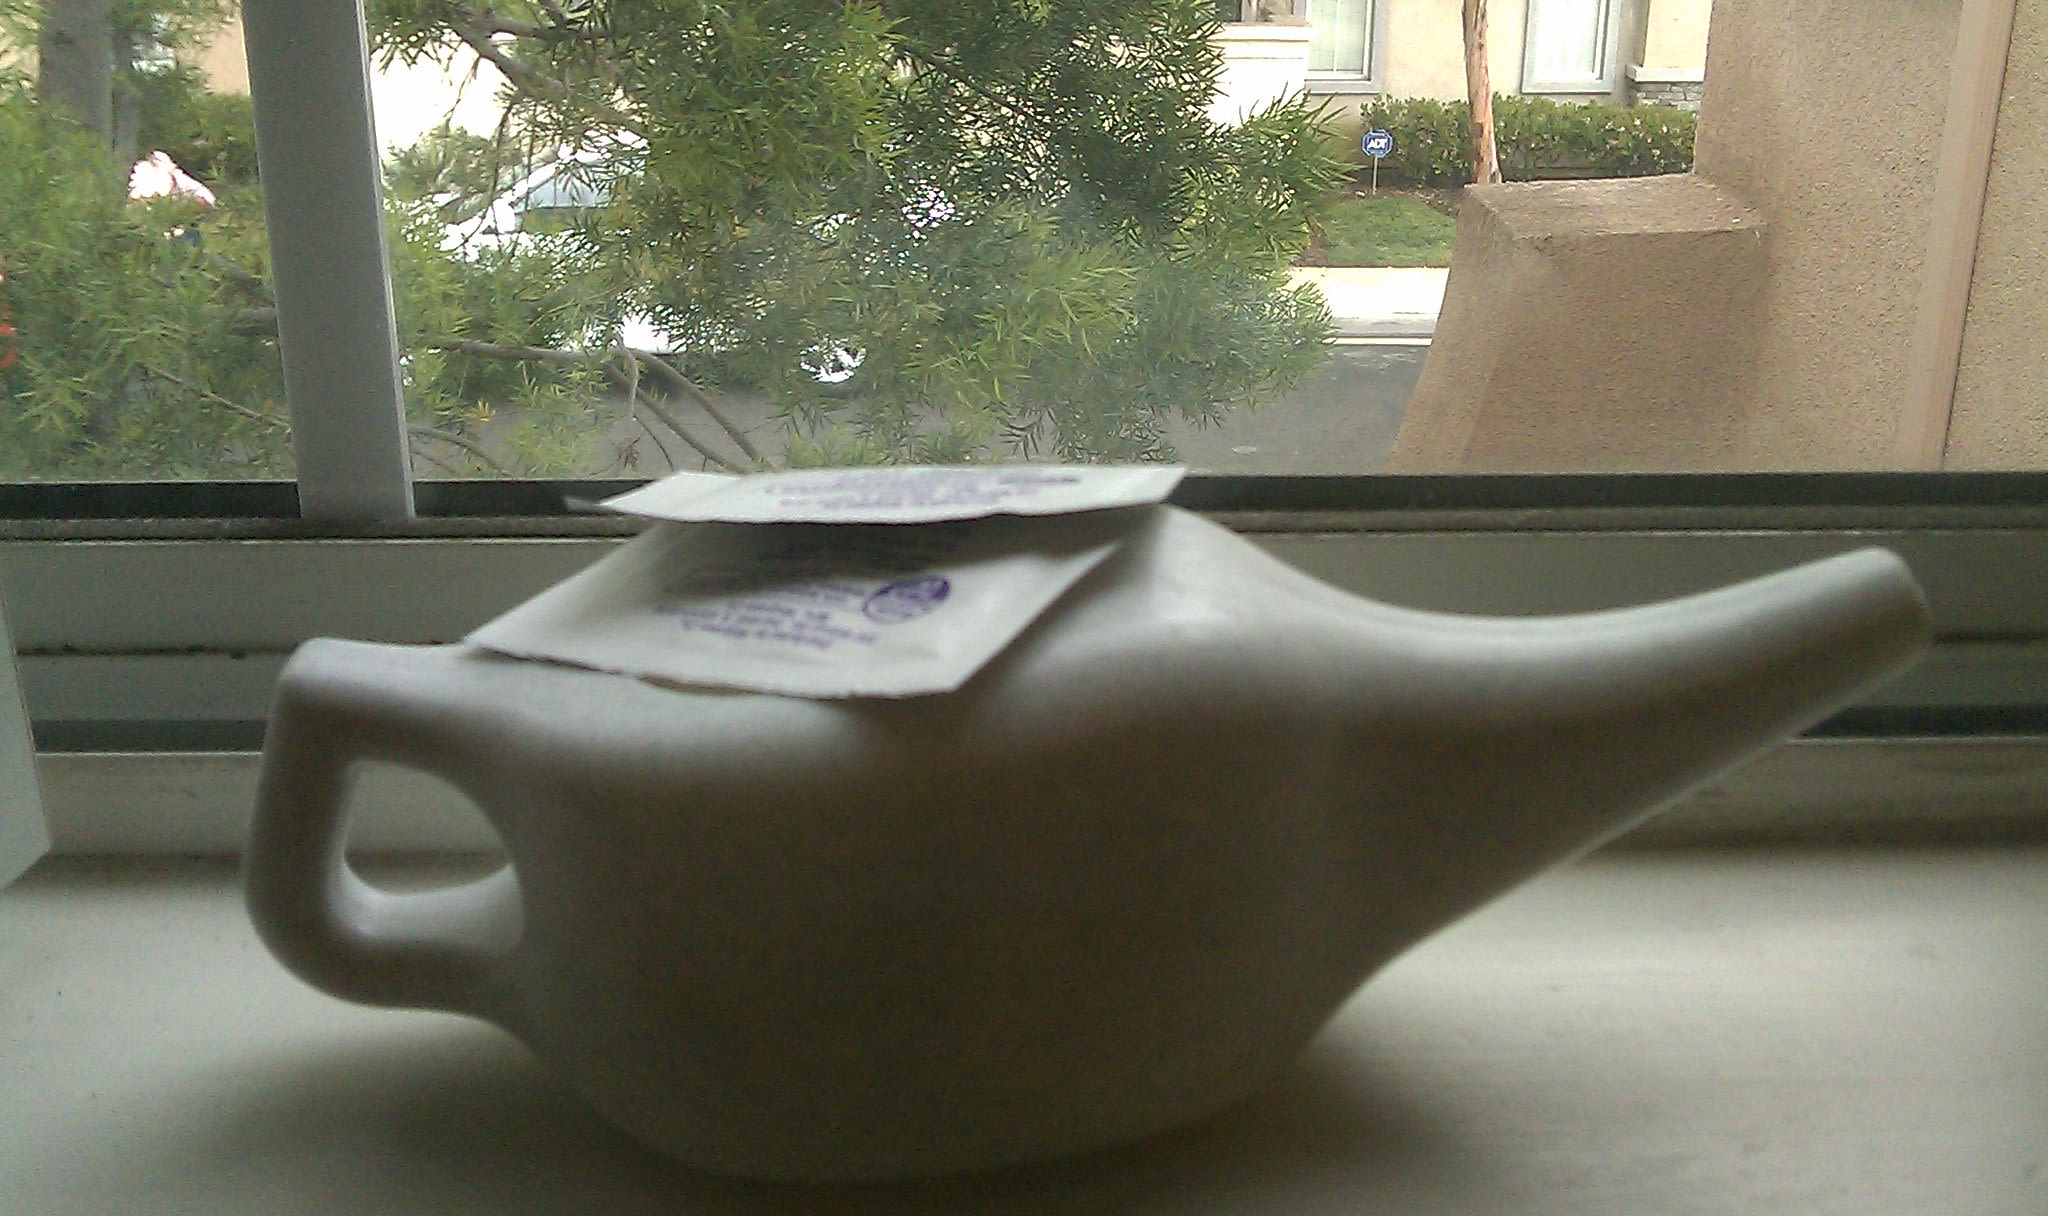 Neti Pot Benefits, Mistakes, Risks and How to Use Safely - Dr. Axe